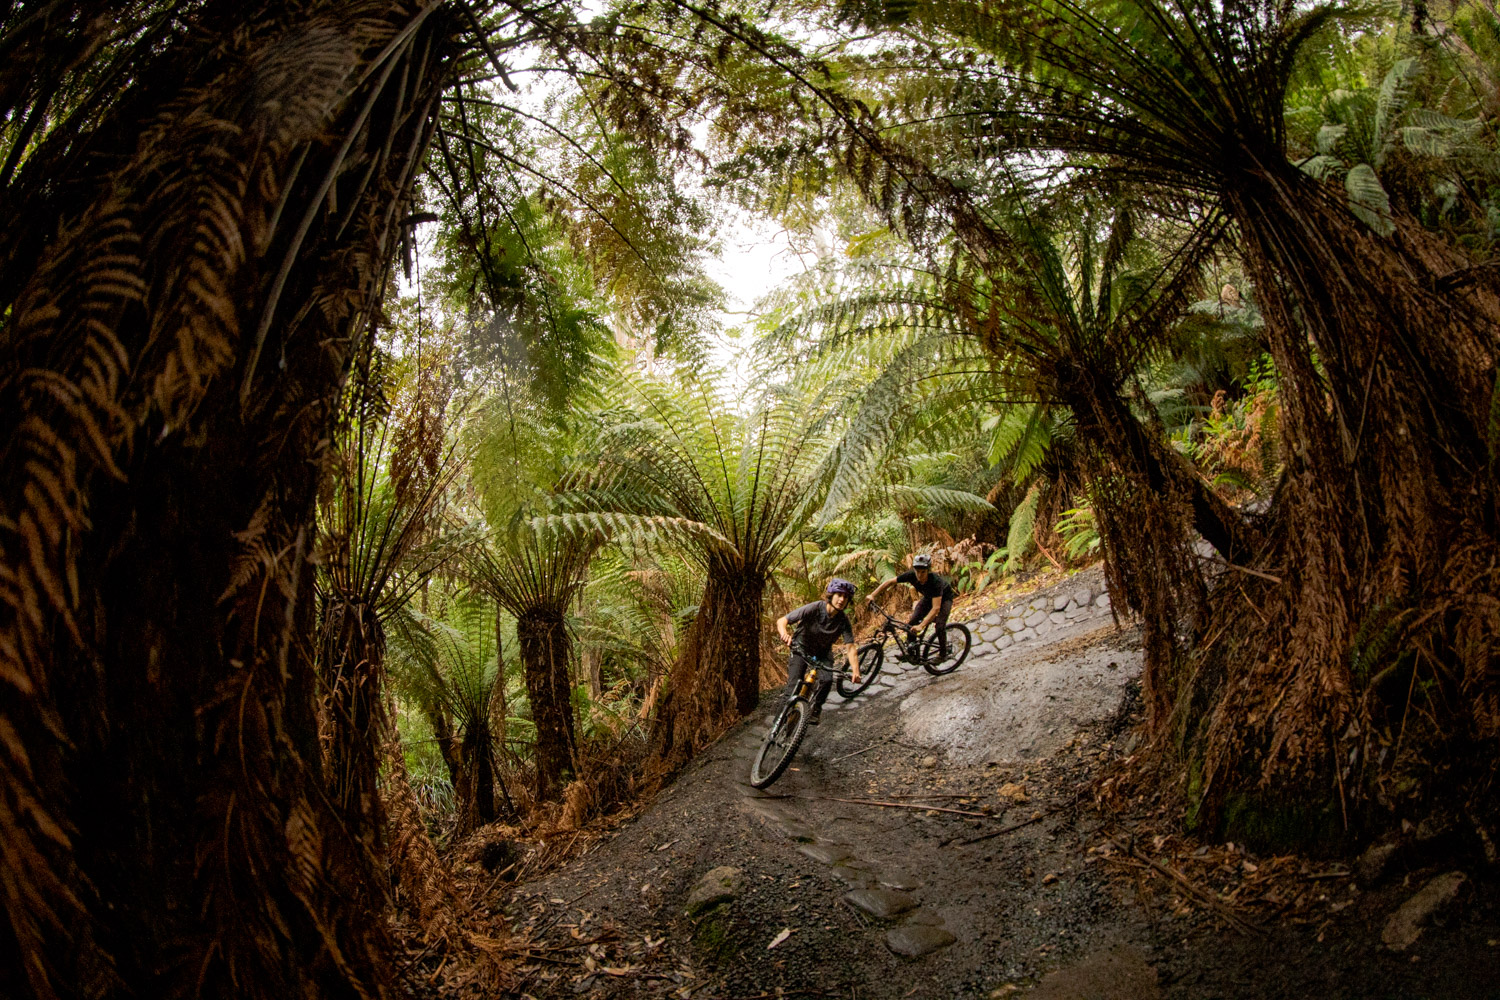 The mountain biking in Derby is fantastic, arguably some of the best in tasmania